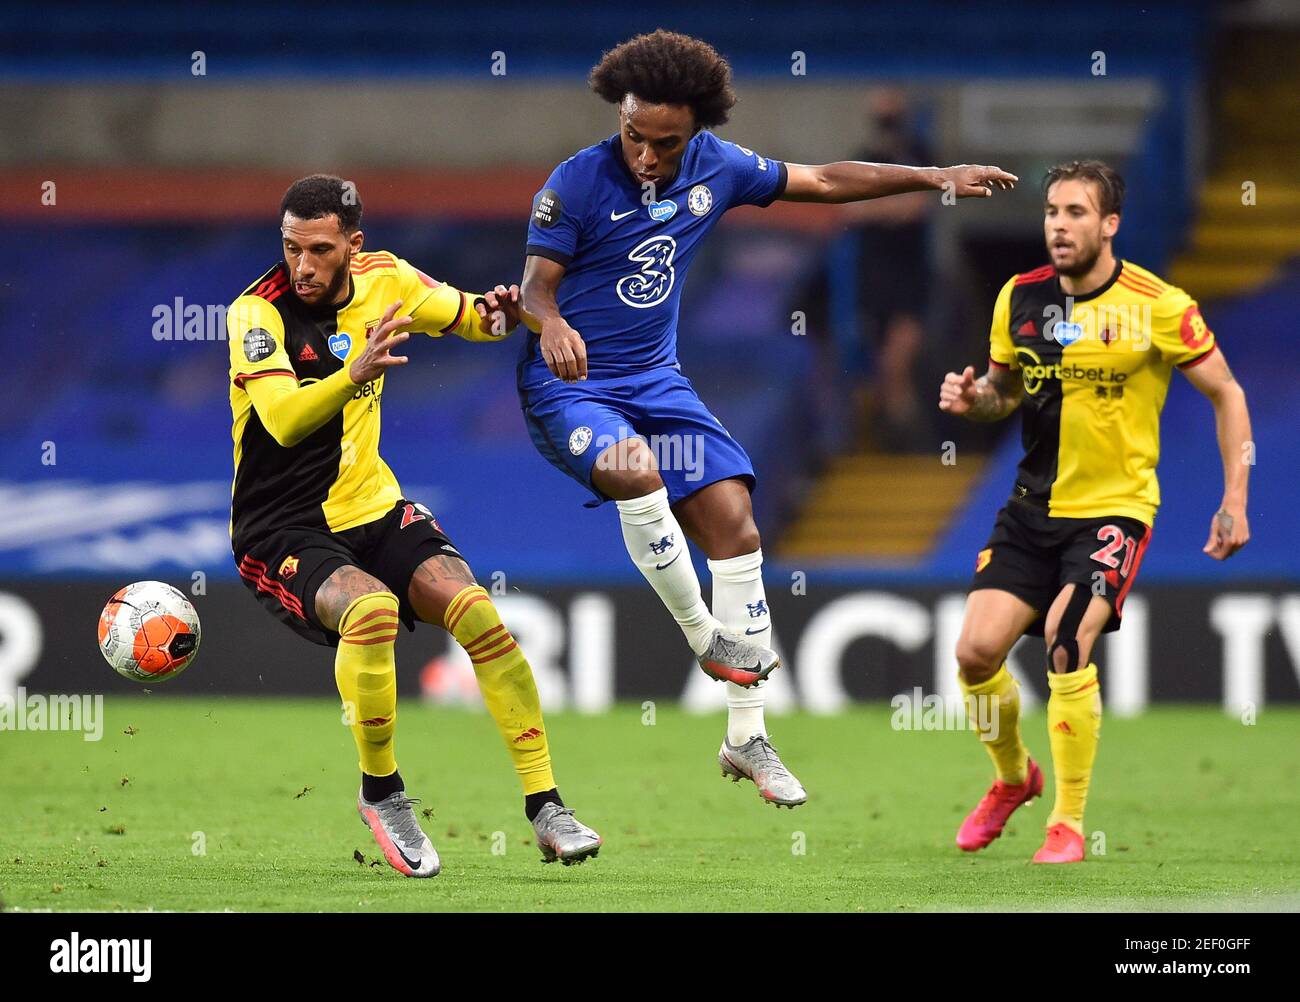 Soccer Football - Premier League - Chelsea v Watford - Stamford Bridge, London, Britain - July 4, 2020  Chelsea's Willian in action with Watford's Etienne Capoue, as play resumes behind closed doors following the outbreak of the coronavirus disease (COVID-19) Glyn Kirk/Pool via REUTERS  EDITORIAL USE ONLY. No use with unauthorized audio, video, data, fixture lists, club/league logos or 'live' services. Online in-match use limited to 75 images, no video emulation. No use in betting, games or single club/league/player publications.  Please contact your account representative for further details. Stock Photo